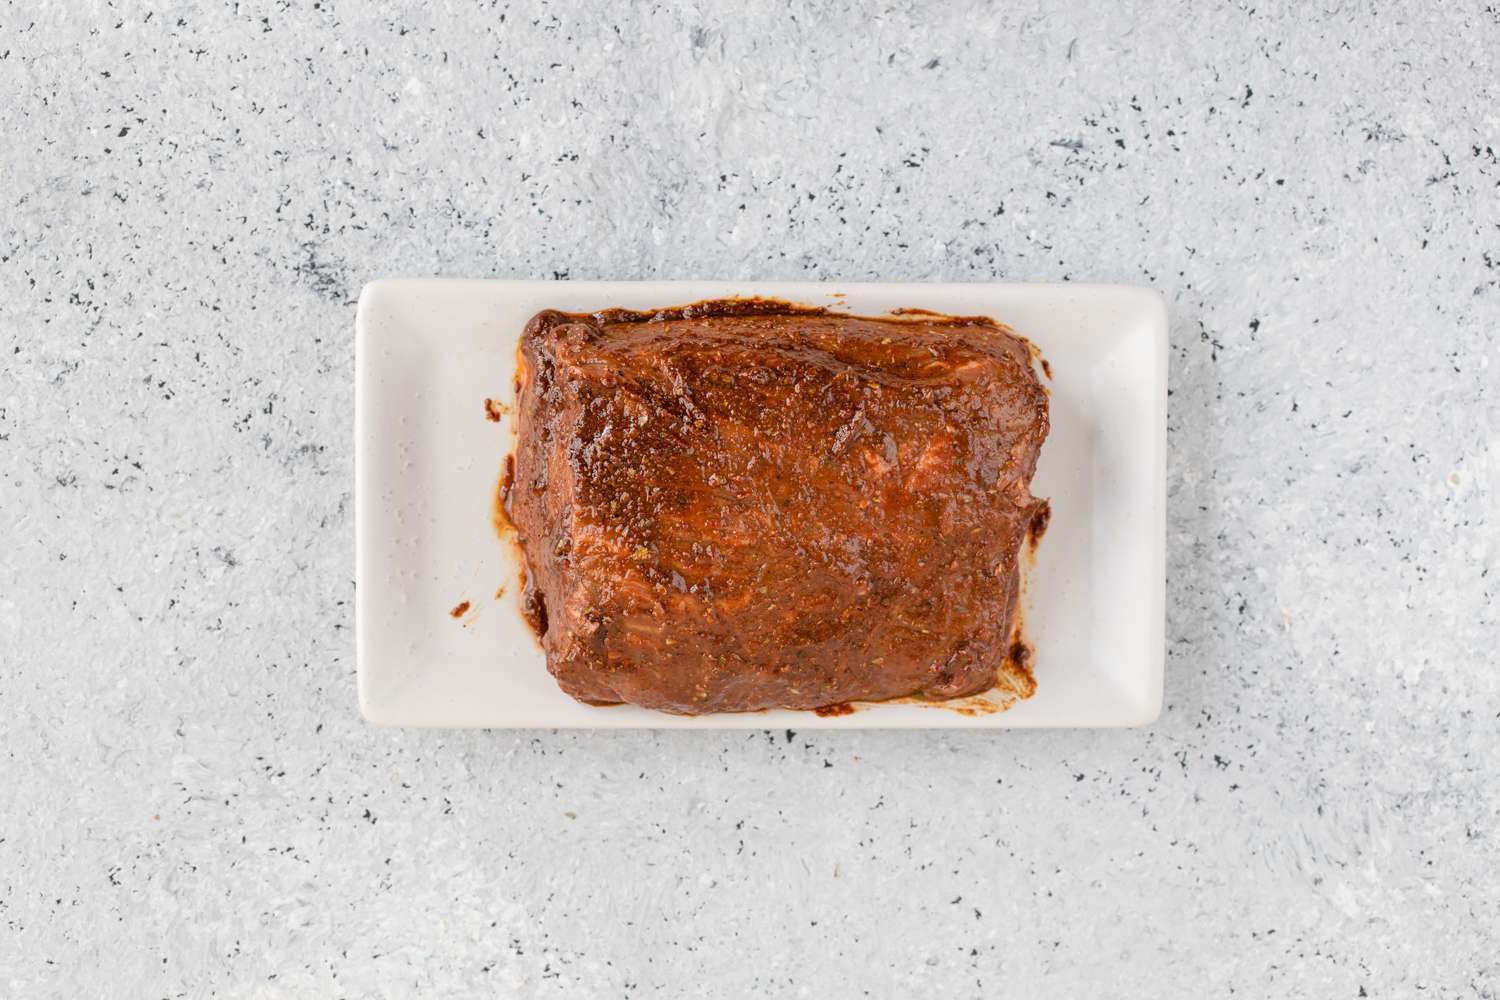 Tri-tip roast rubbed with spice mixture in a rectangular baking dish